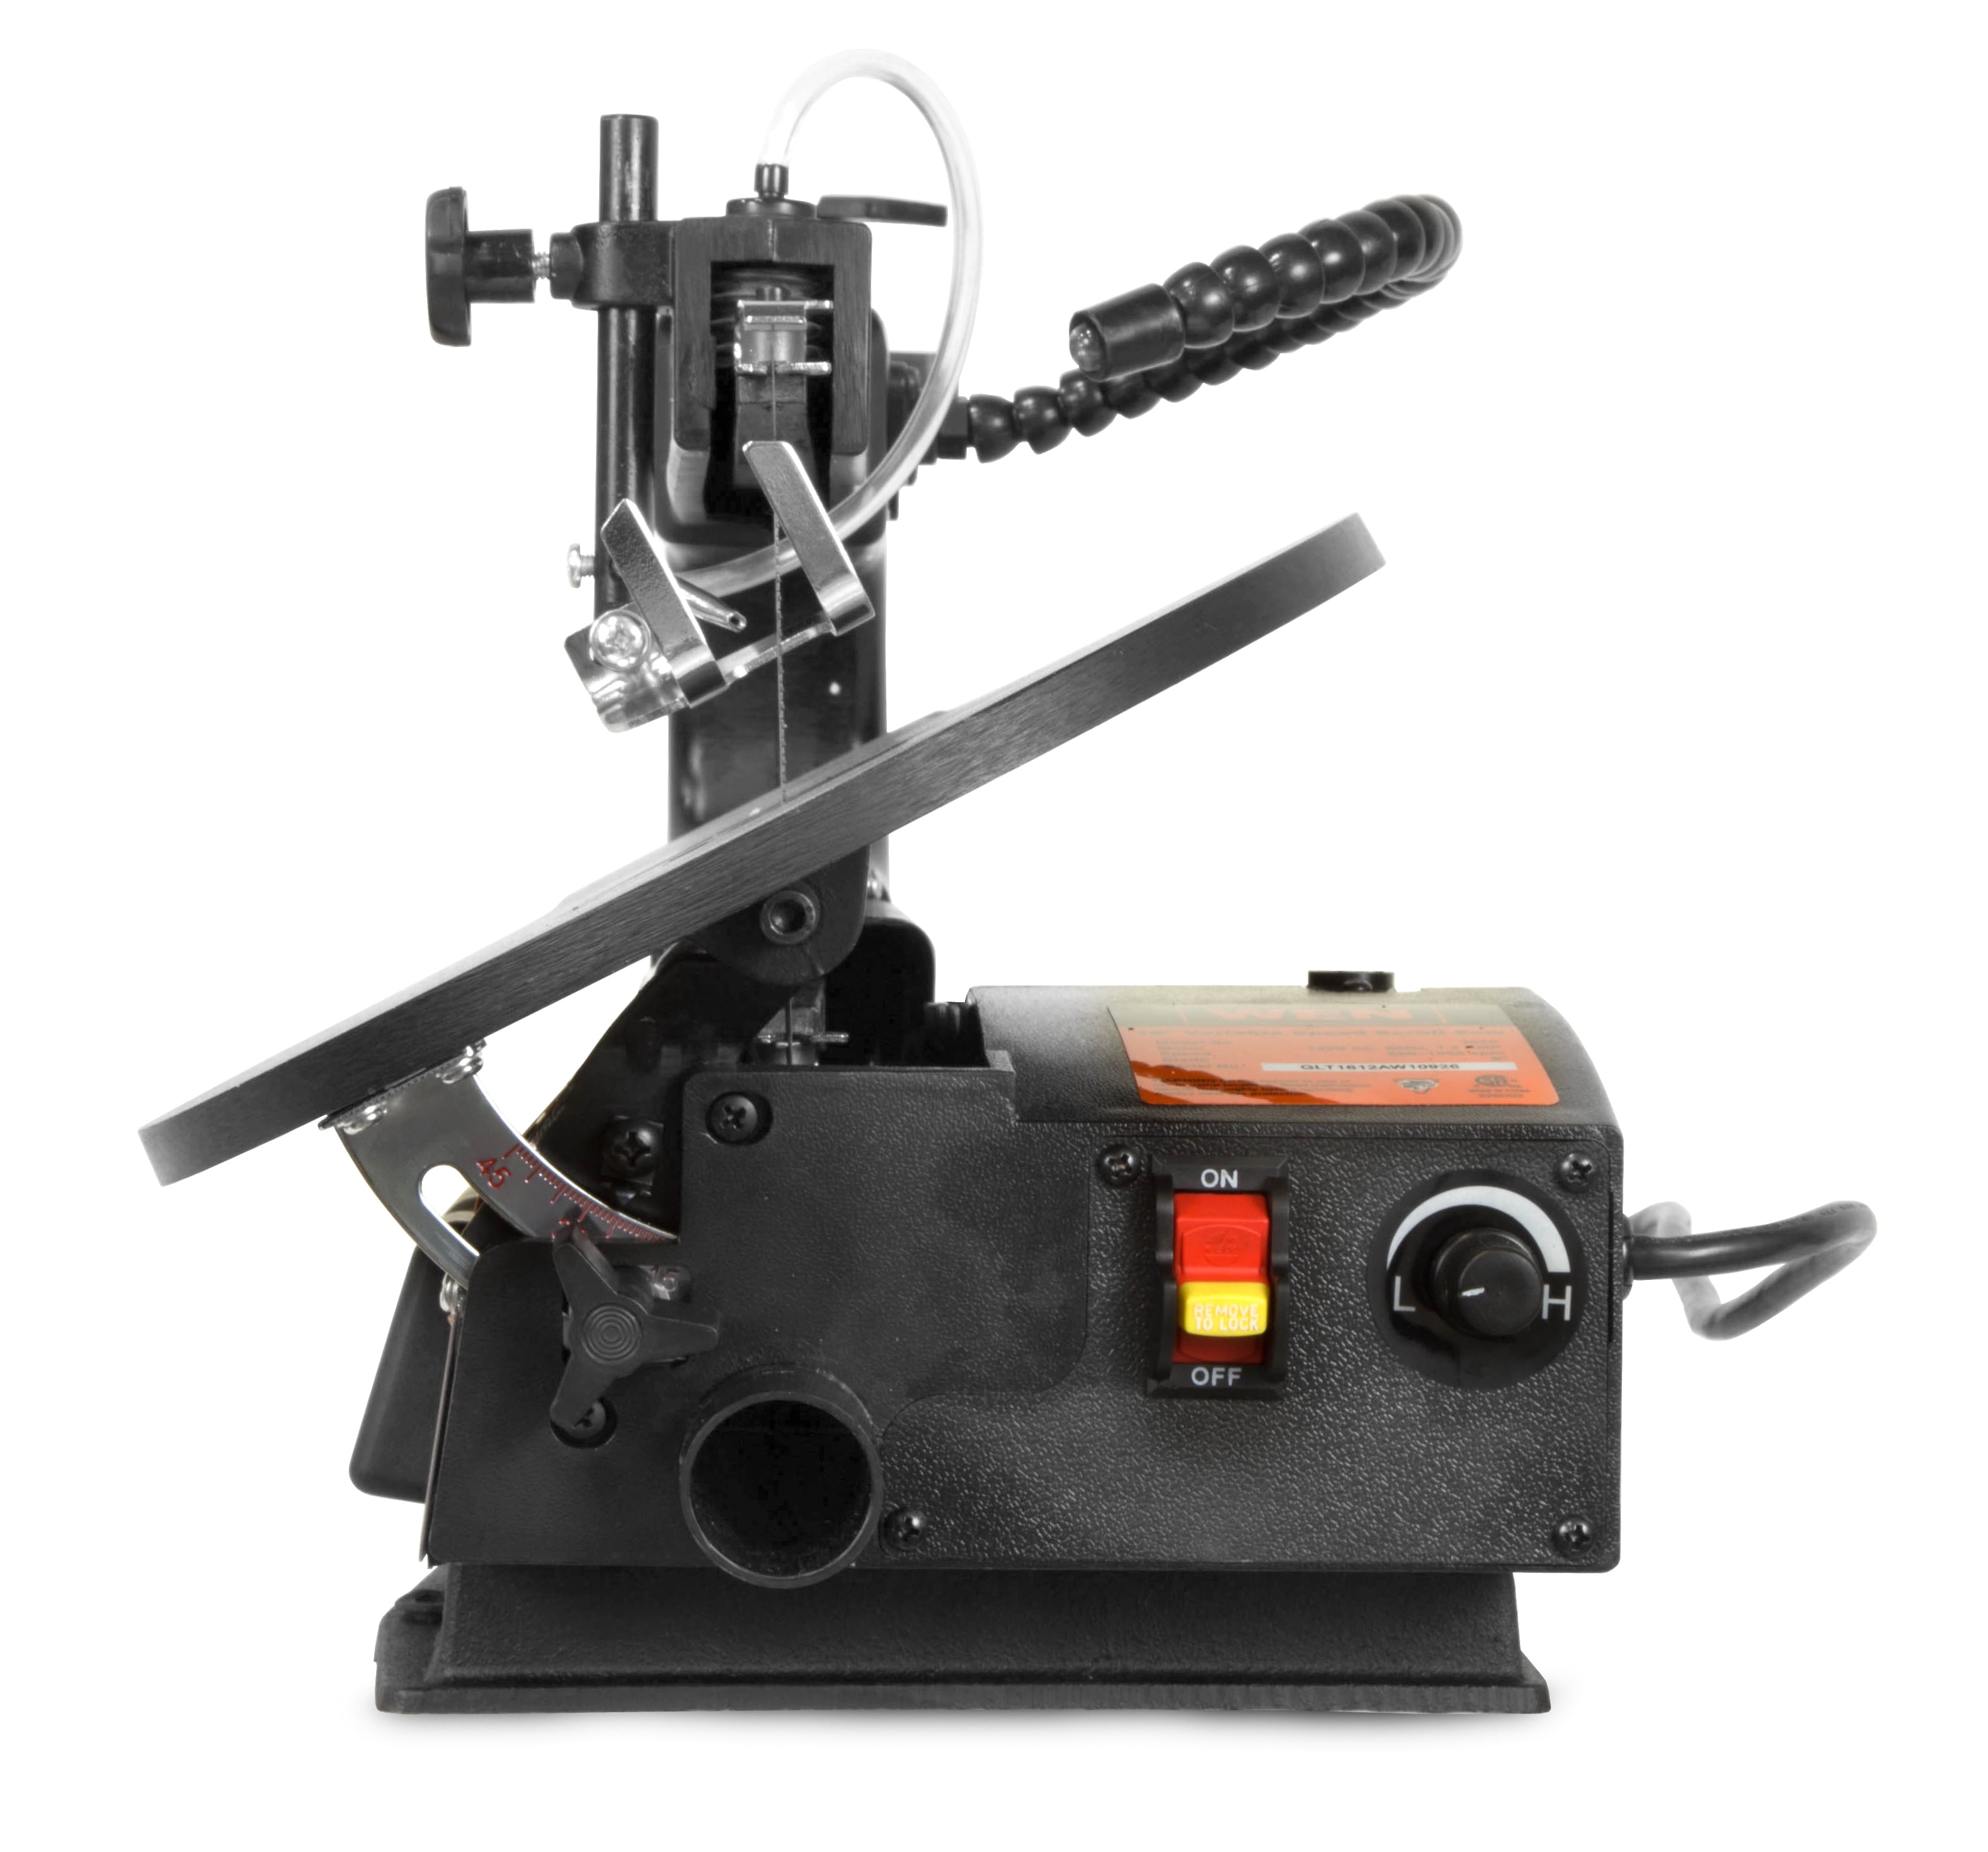 WEN Products 16-Inch Two-Direction Variable Speed Scroll Saw, 3921